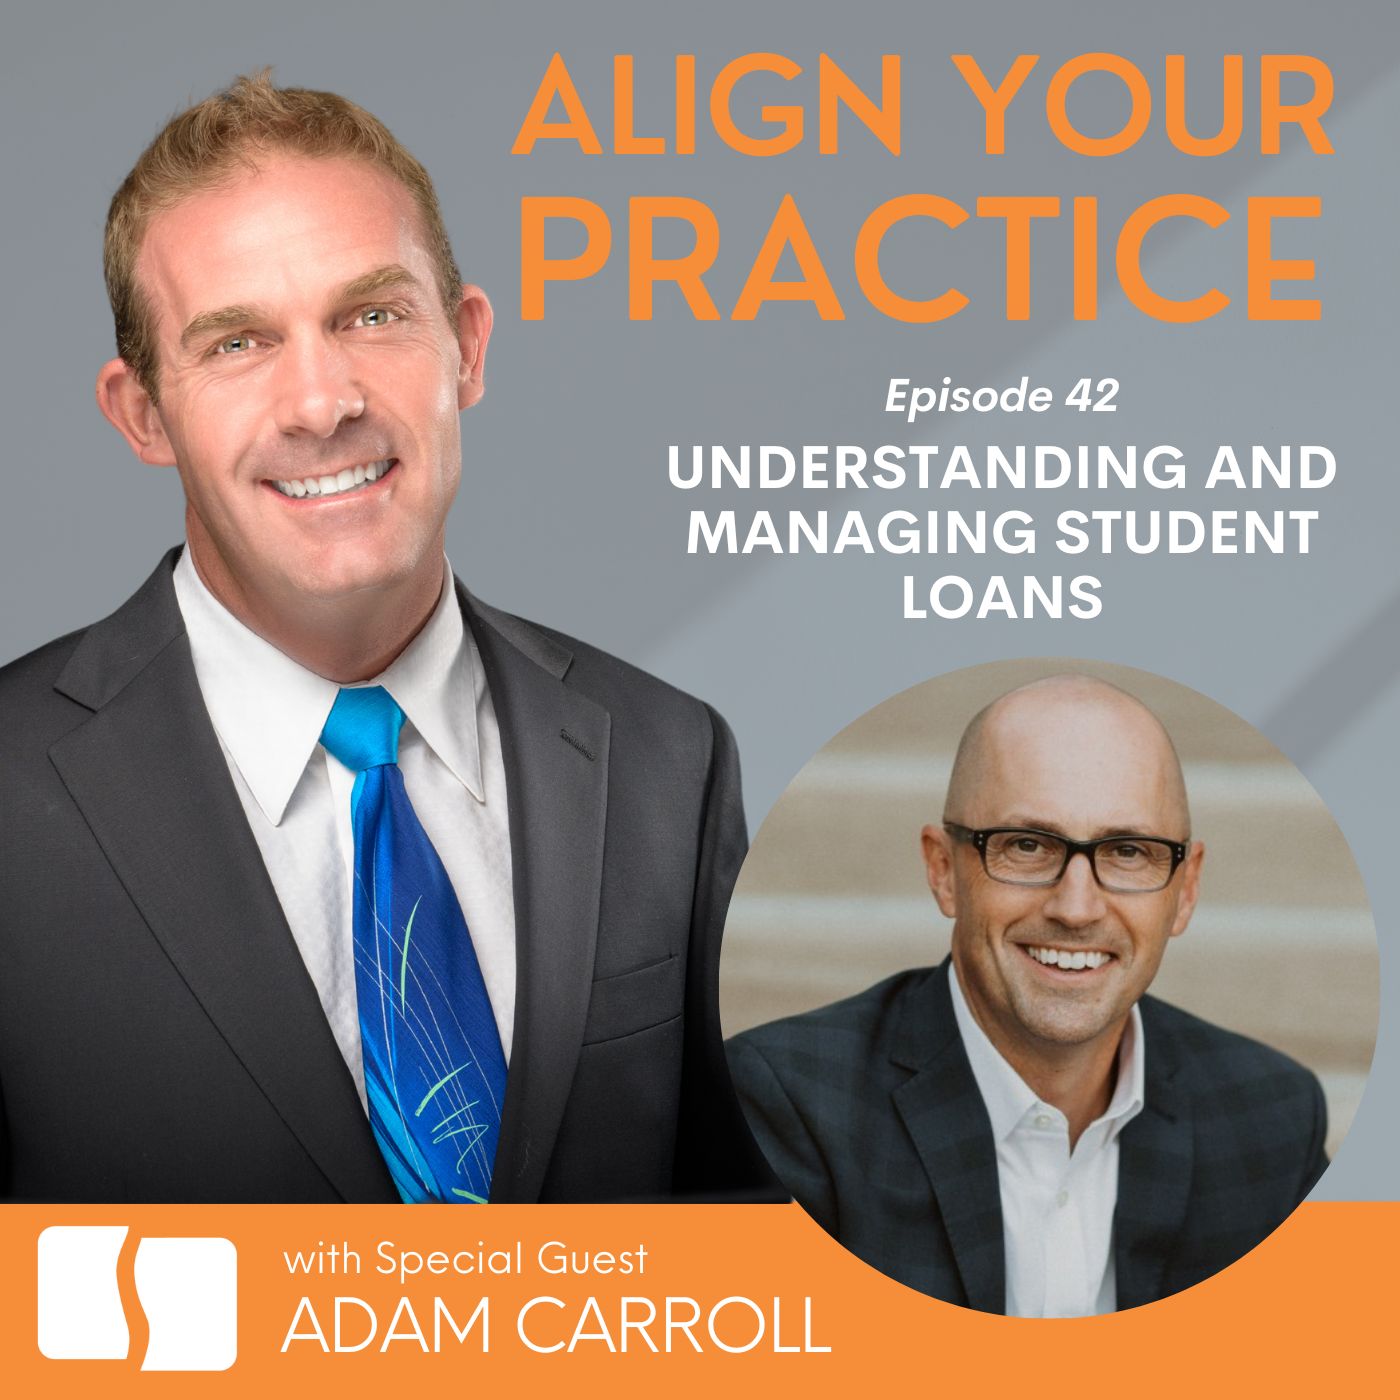 Artwork for podcast Align Your Practice